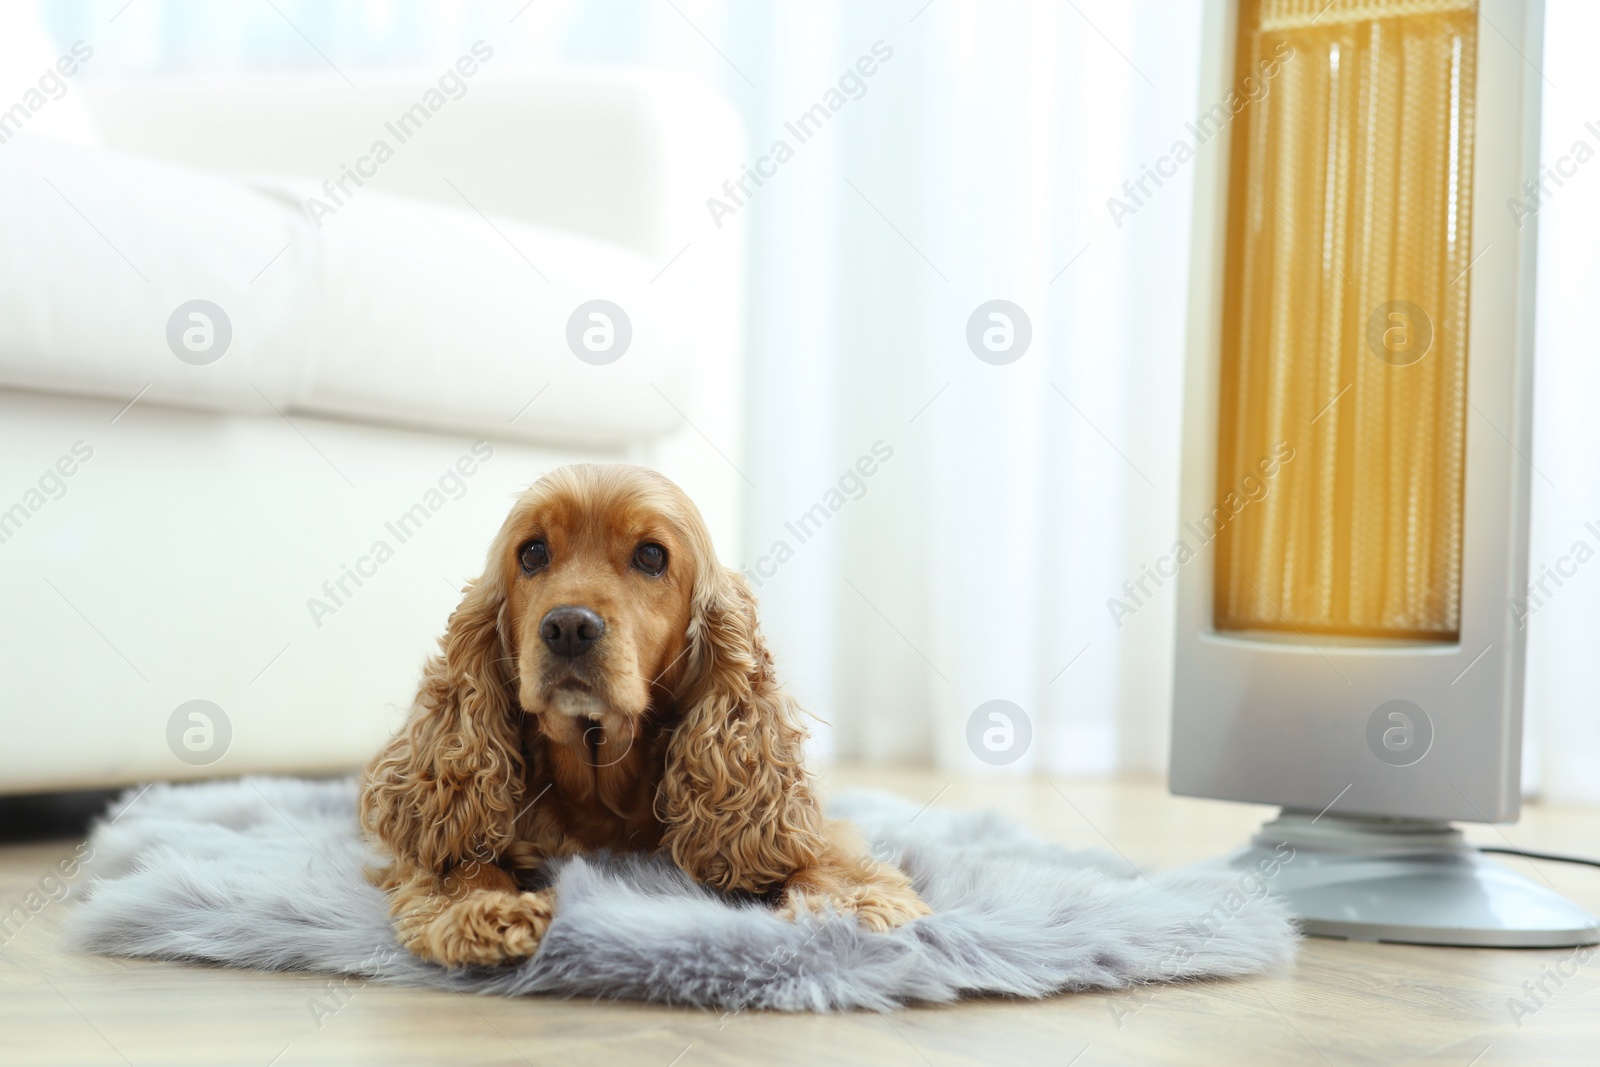 Photo of Beautiful cocker spaniel lying on rug near electric heater at home